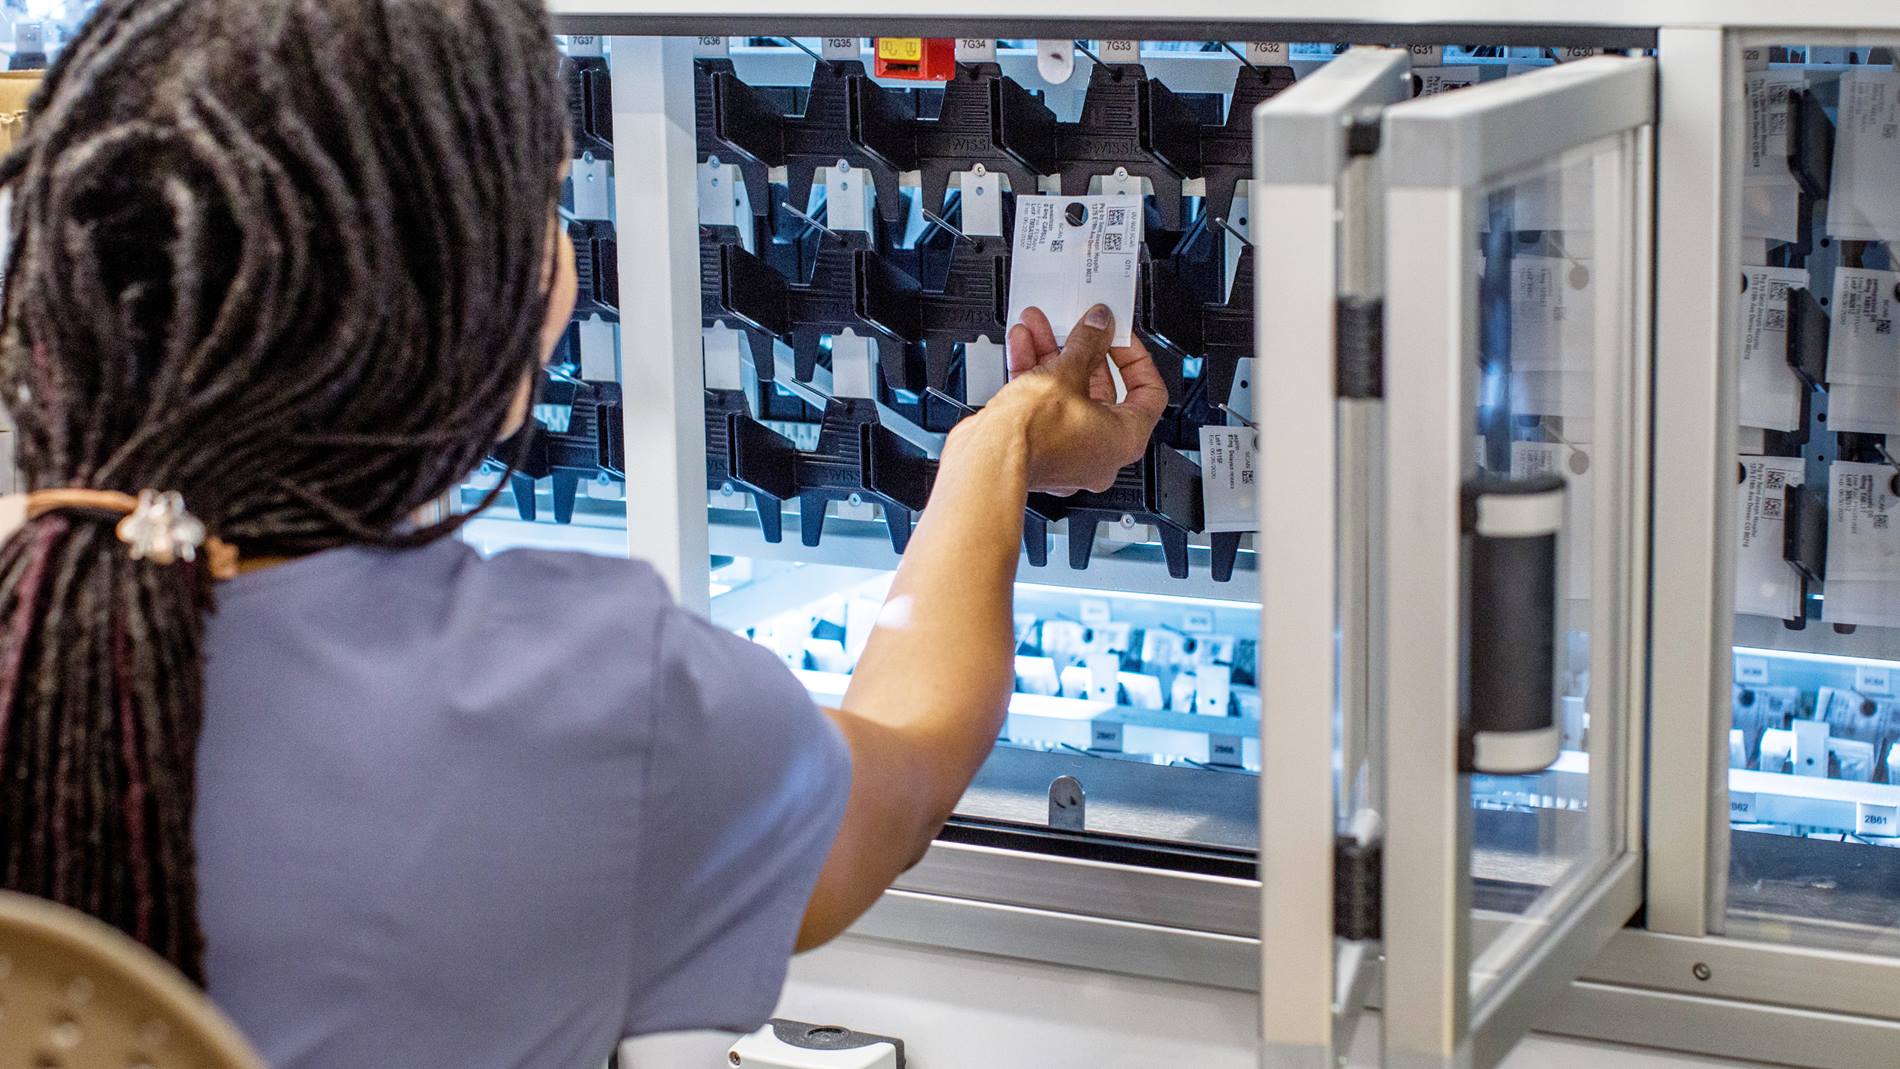 Pharmacy technician using PillPick automated medication packaging and dispensing system